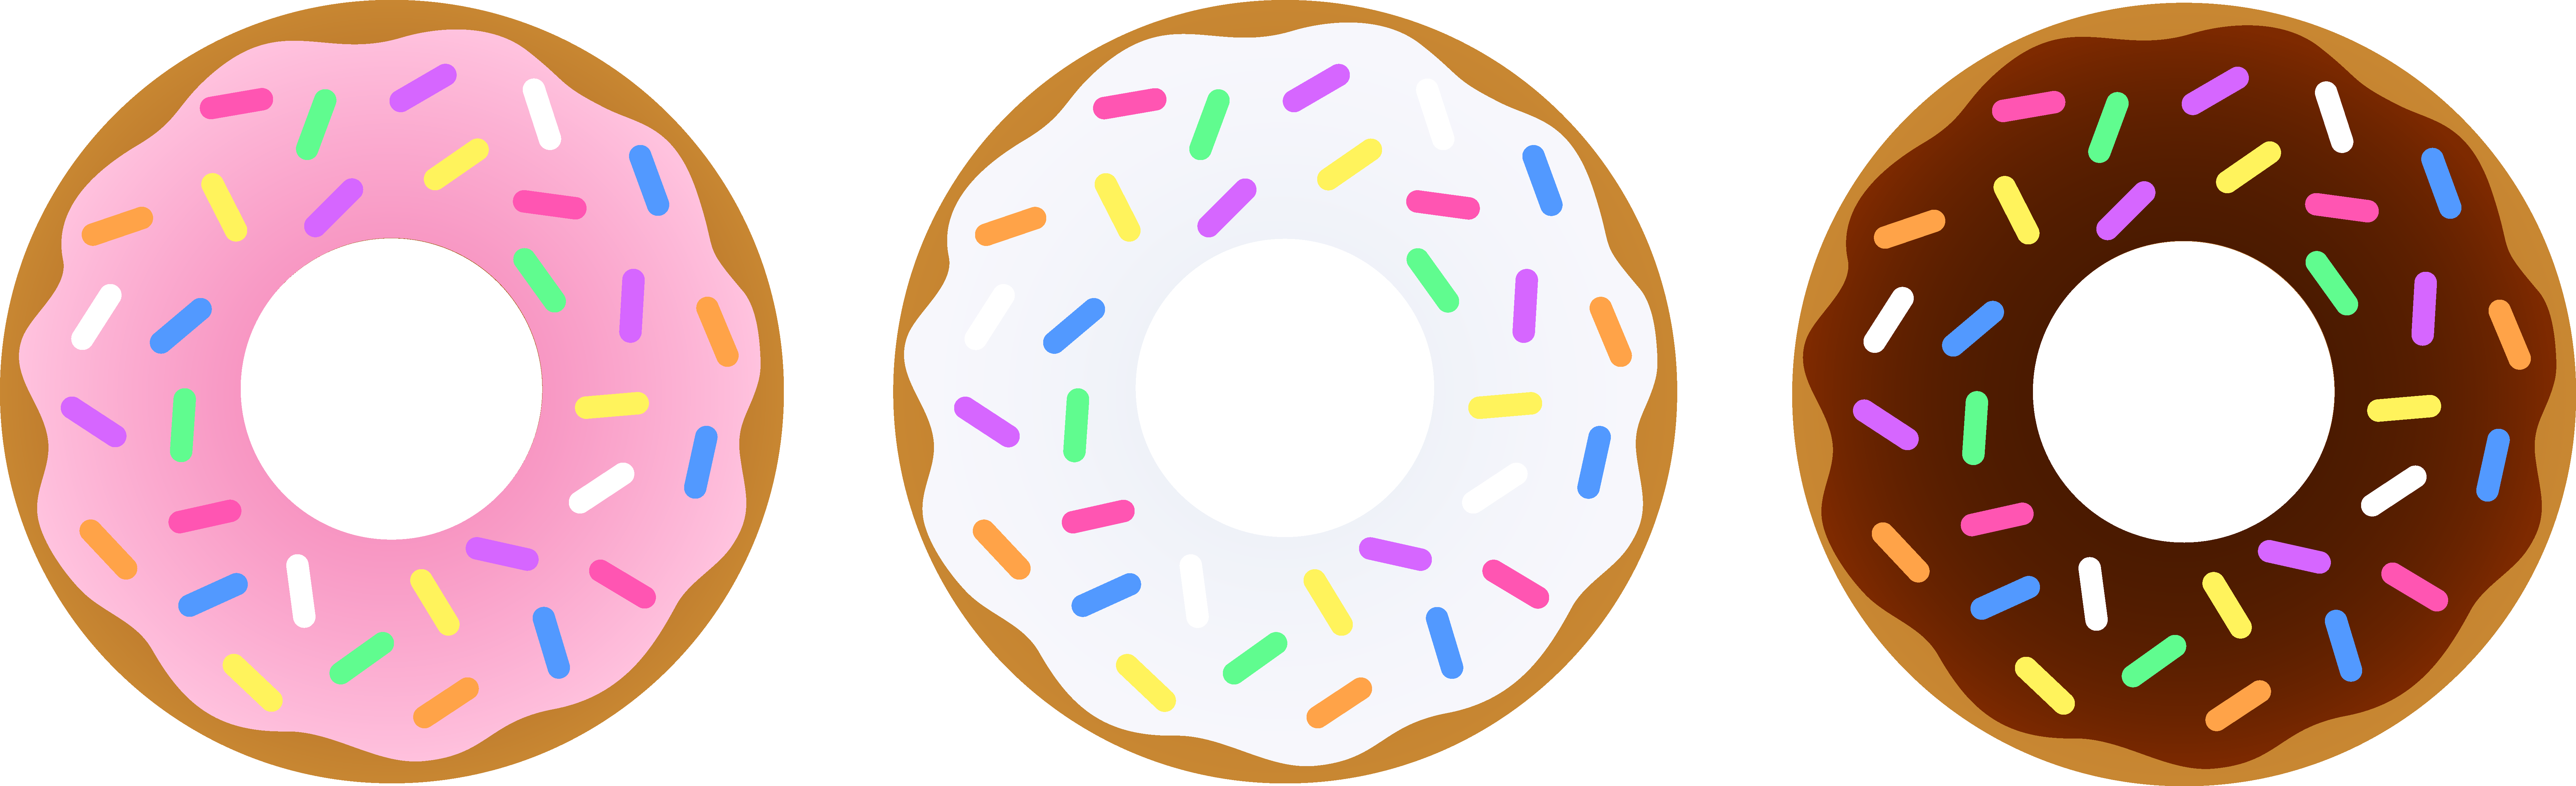 Donuts clipart beignet.  collection of donut